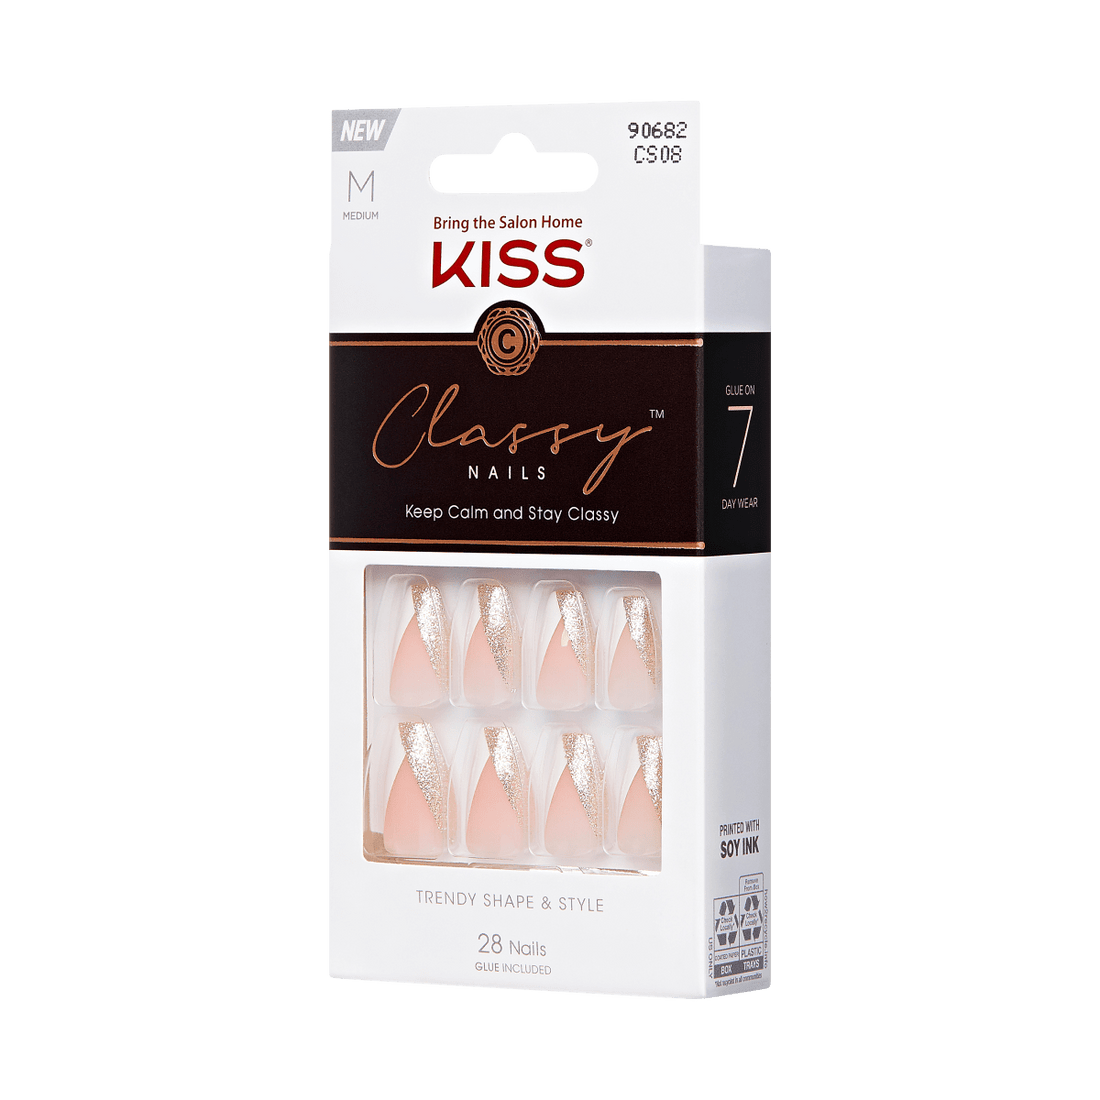 KISS Classy Nails, Press-On Nails, The BOSS, Silver, Med Coffin, 28ct